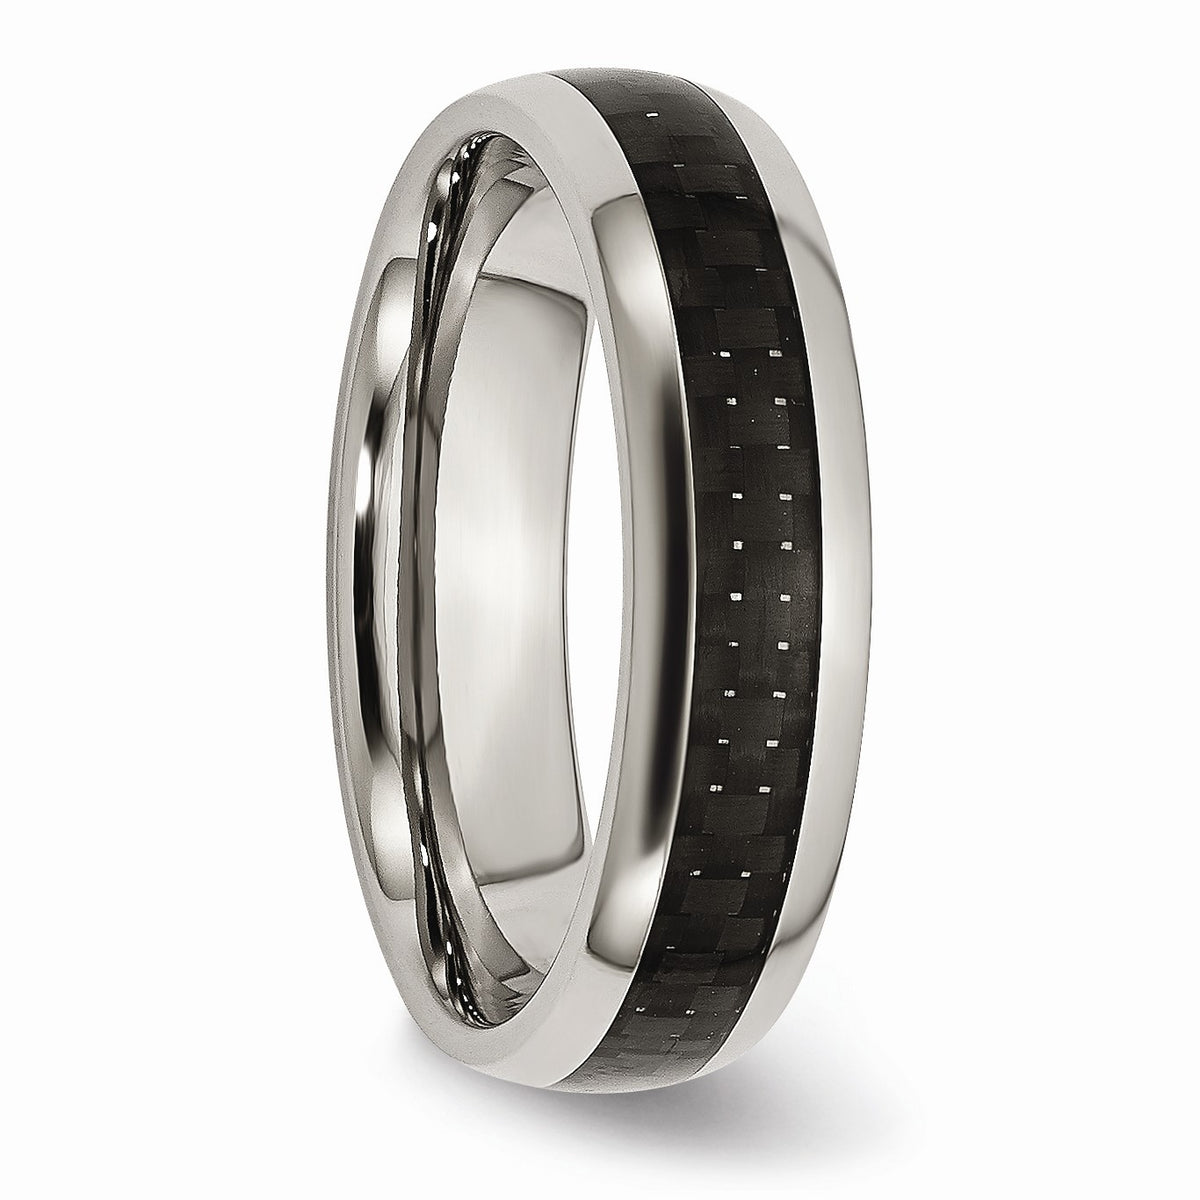 Alternate view of the Titanium Black Carbon Fiber 6mm Polished Domed Comfort Fit Band by The Black Bow Jewelry Co.